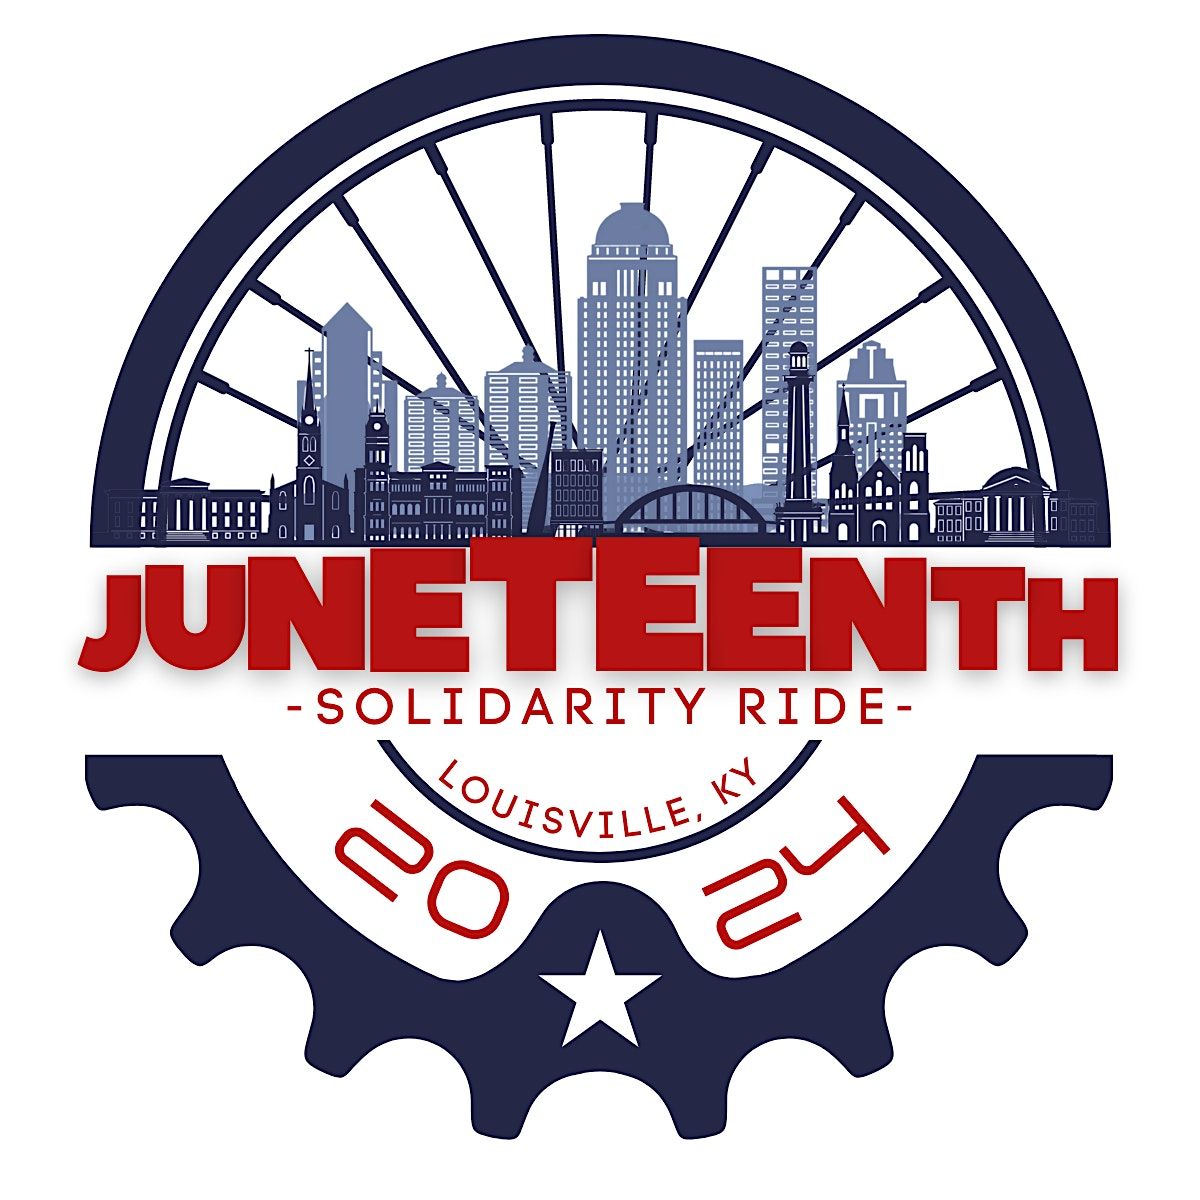 5th Annual Juneteenth Solidarity Ride